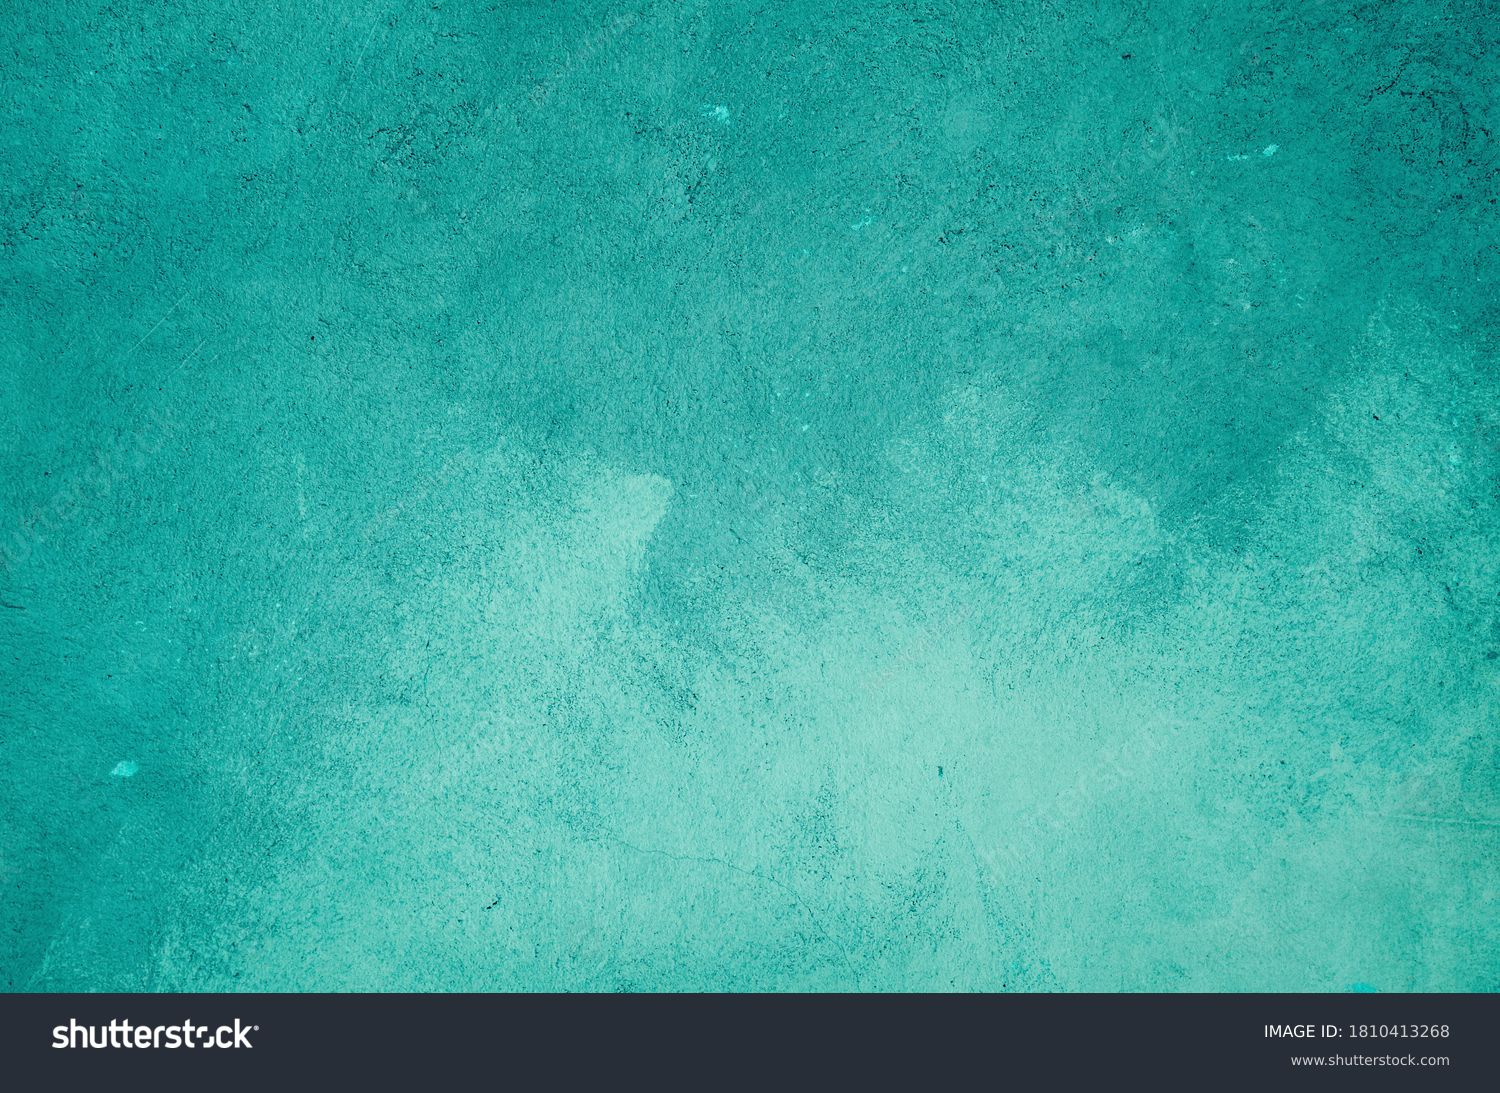 Turquoise painted wall background or texture  #1810413268